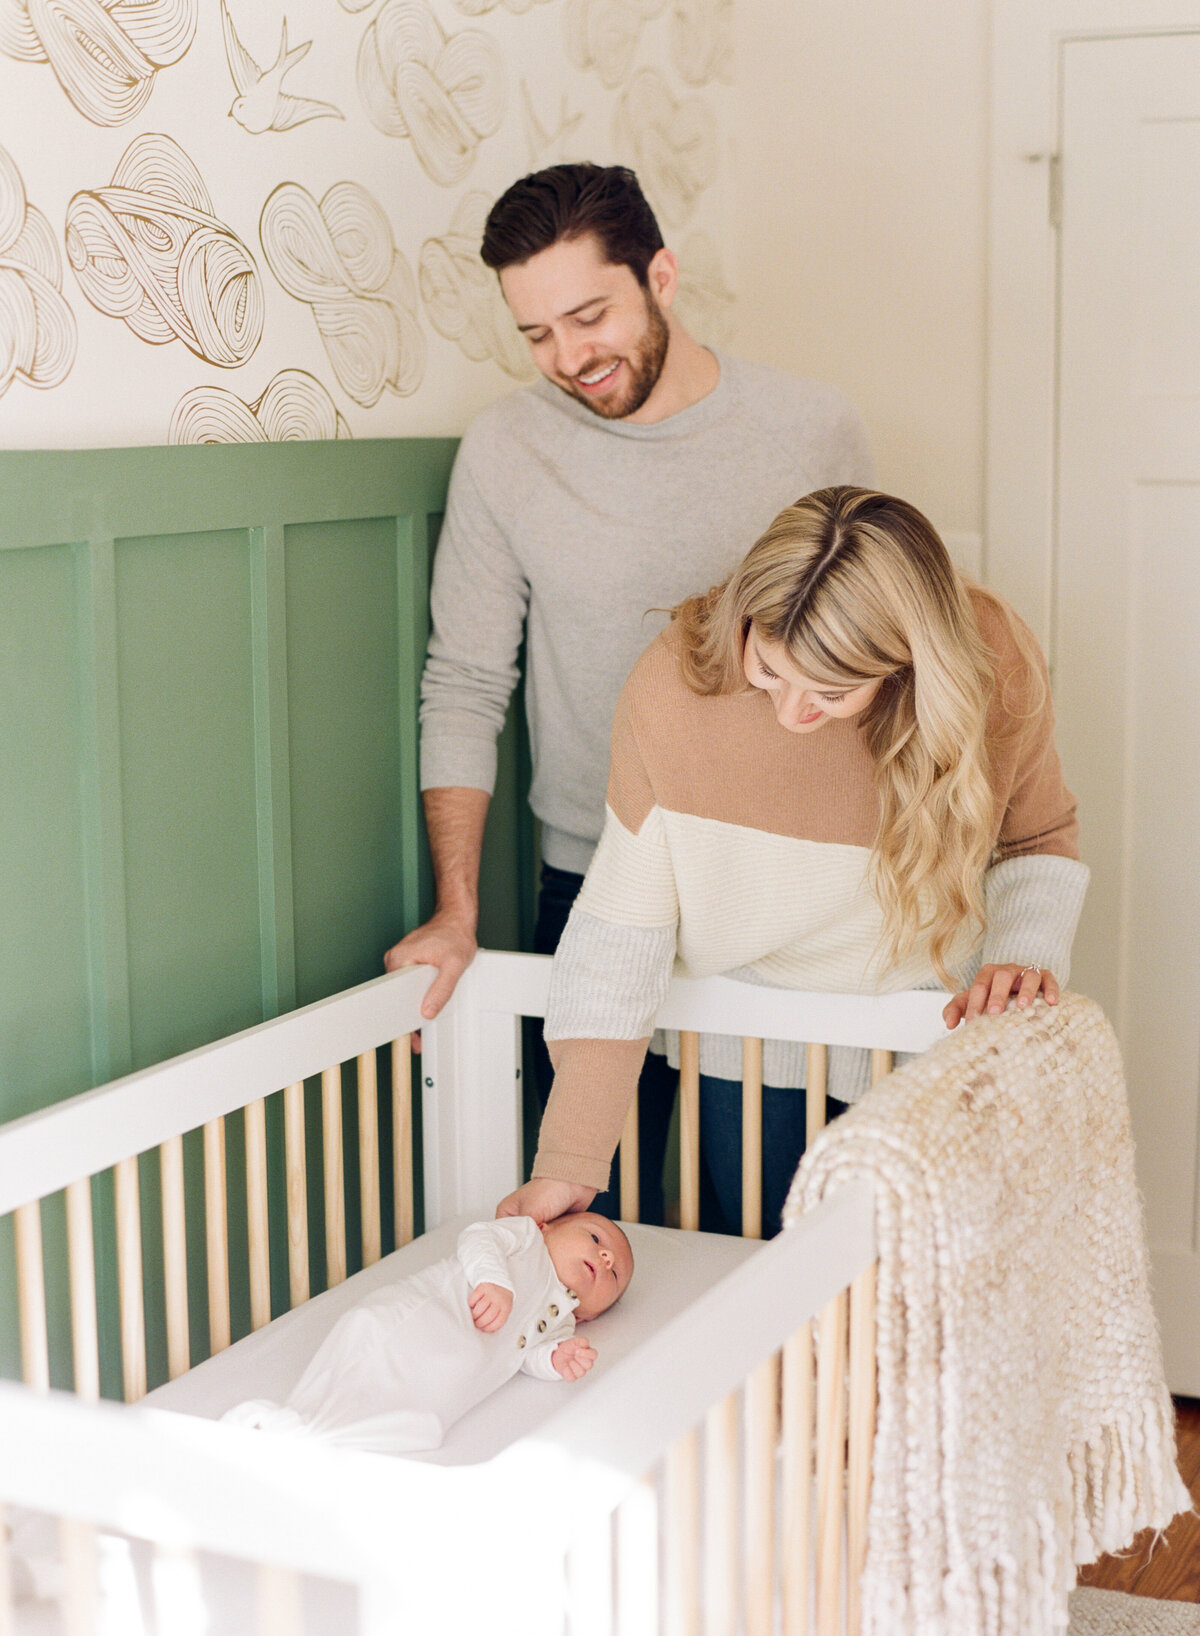 Mom and dad look lovingly over their new baby laying in the crib during a newborn photography session in Raleigh. Photo by Raleigh Newborn Photography A.J. Dunlap Photography.